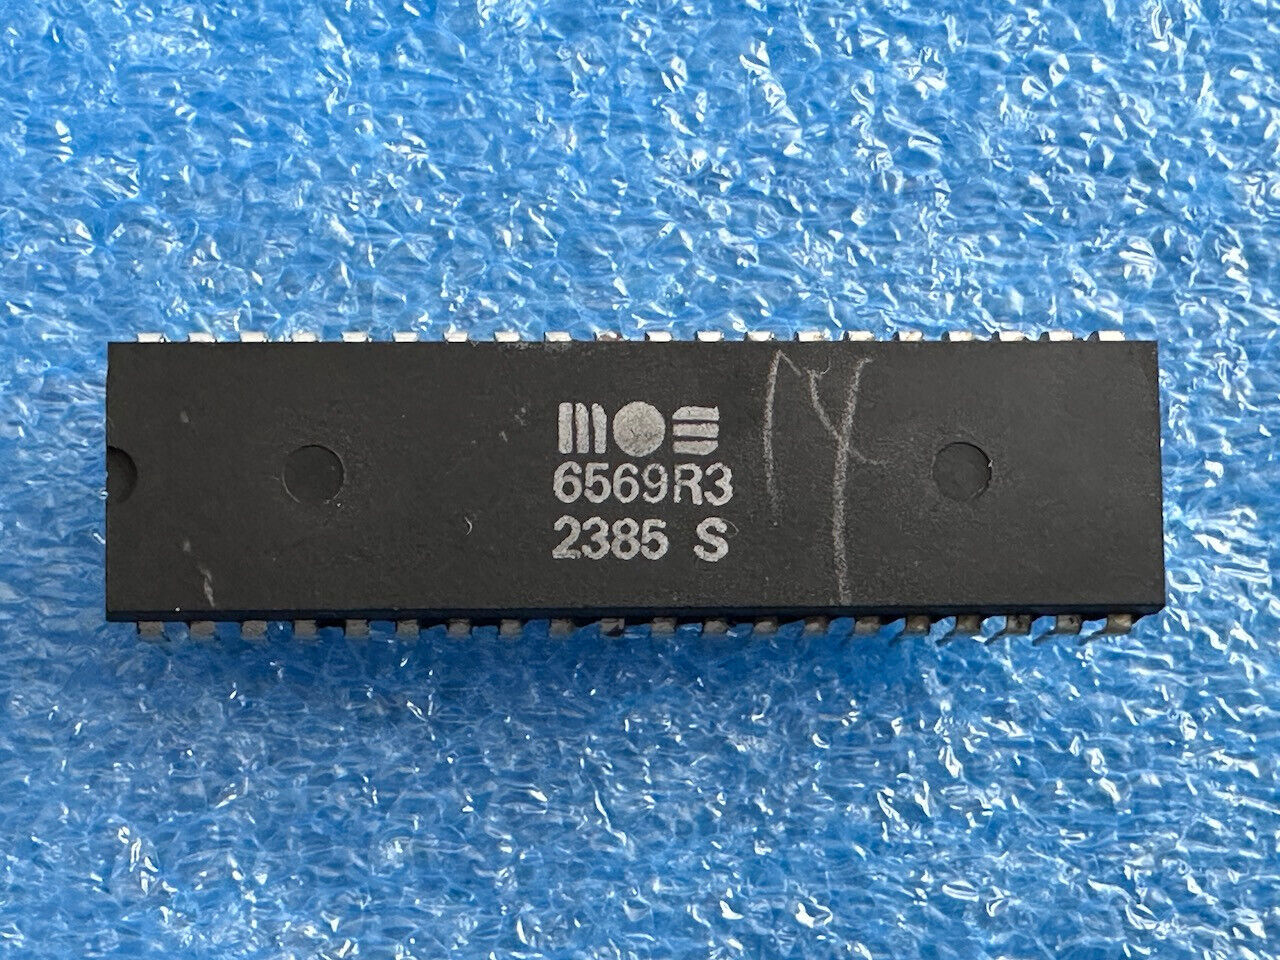 Mos 6569 R3 VIC Video Chip IC for Commodore C64, SX64/ Mos 6569R3 P.Woche :23 85